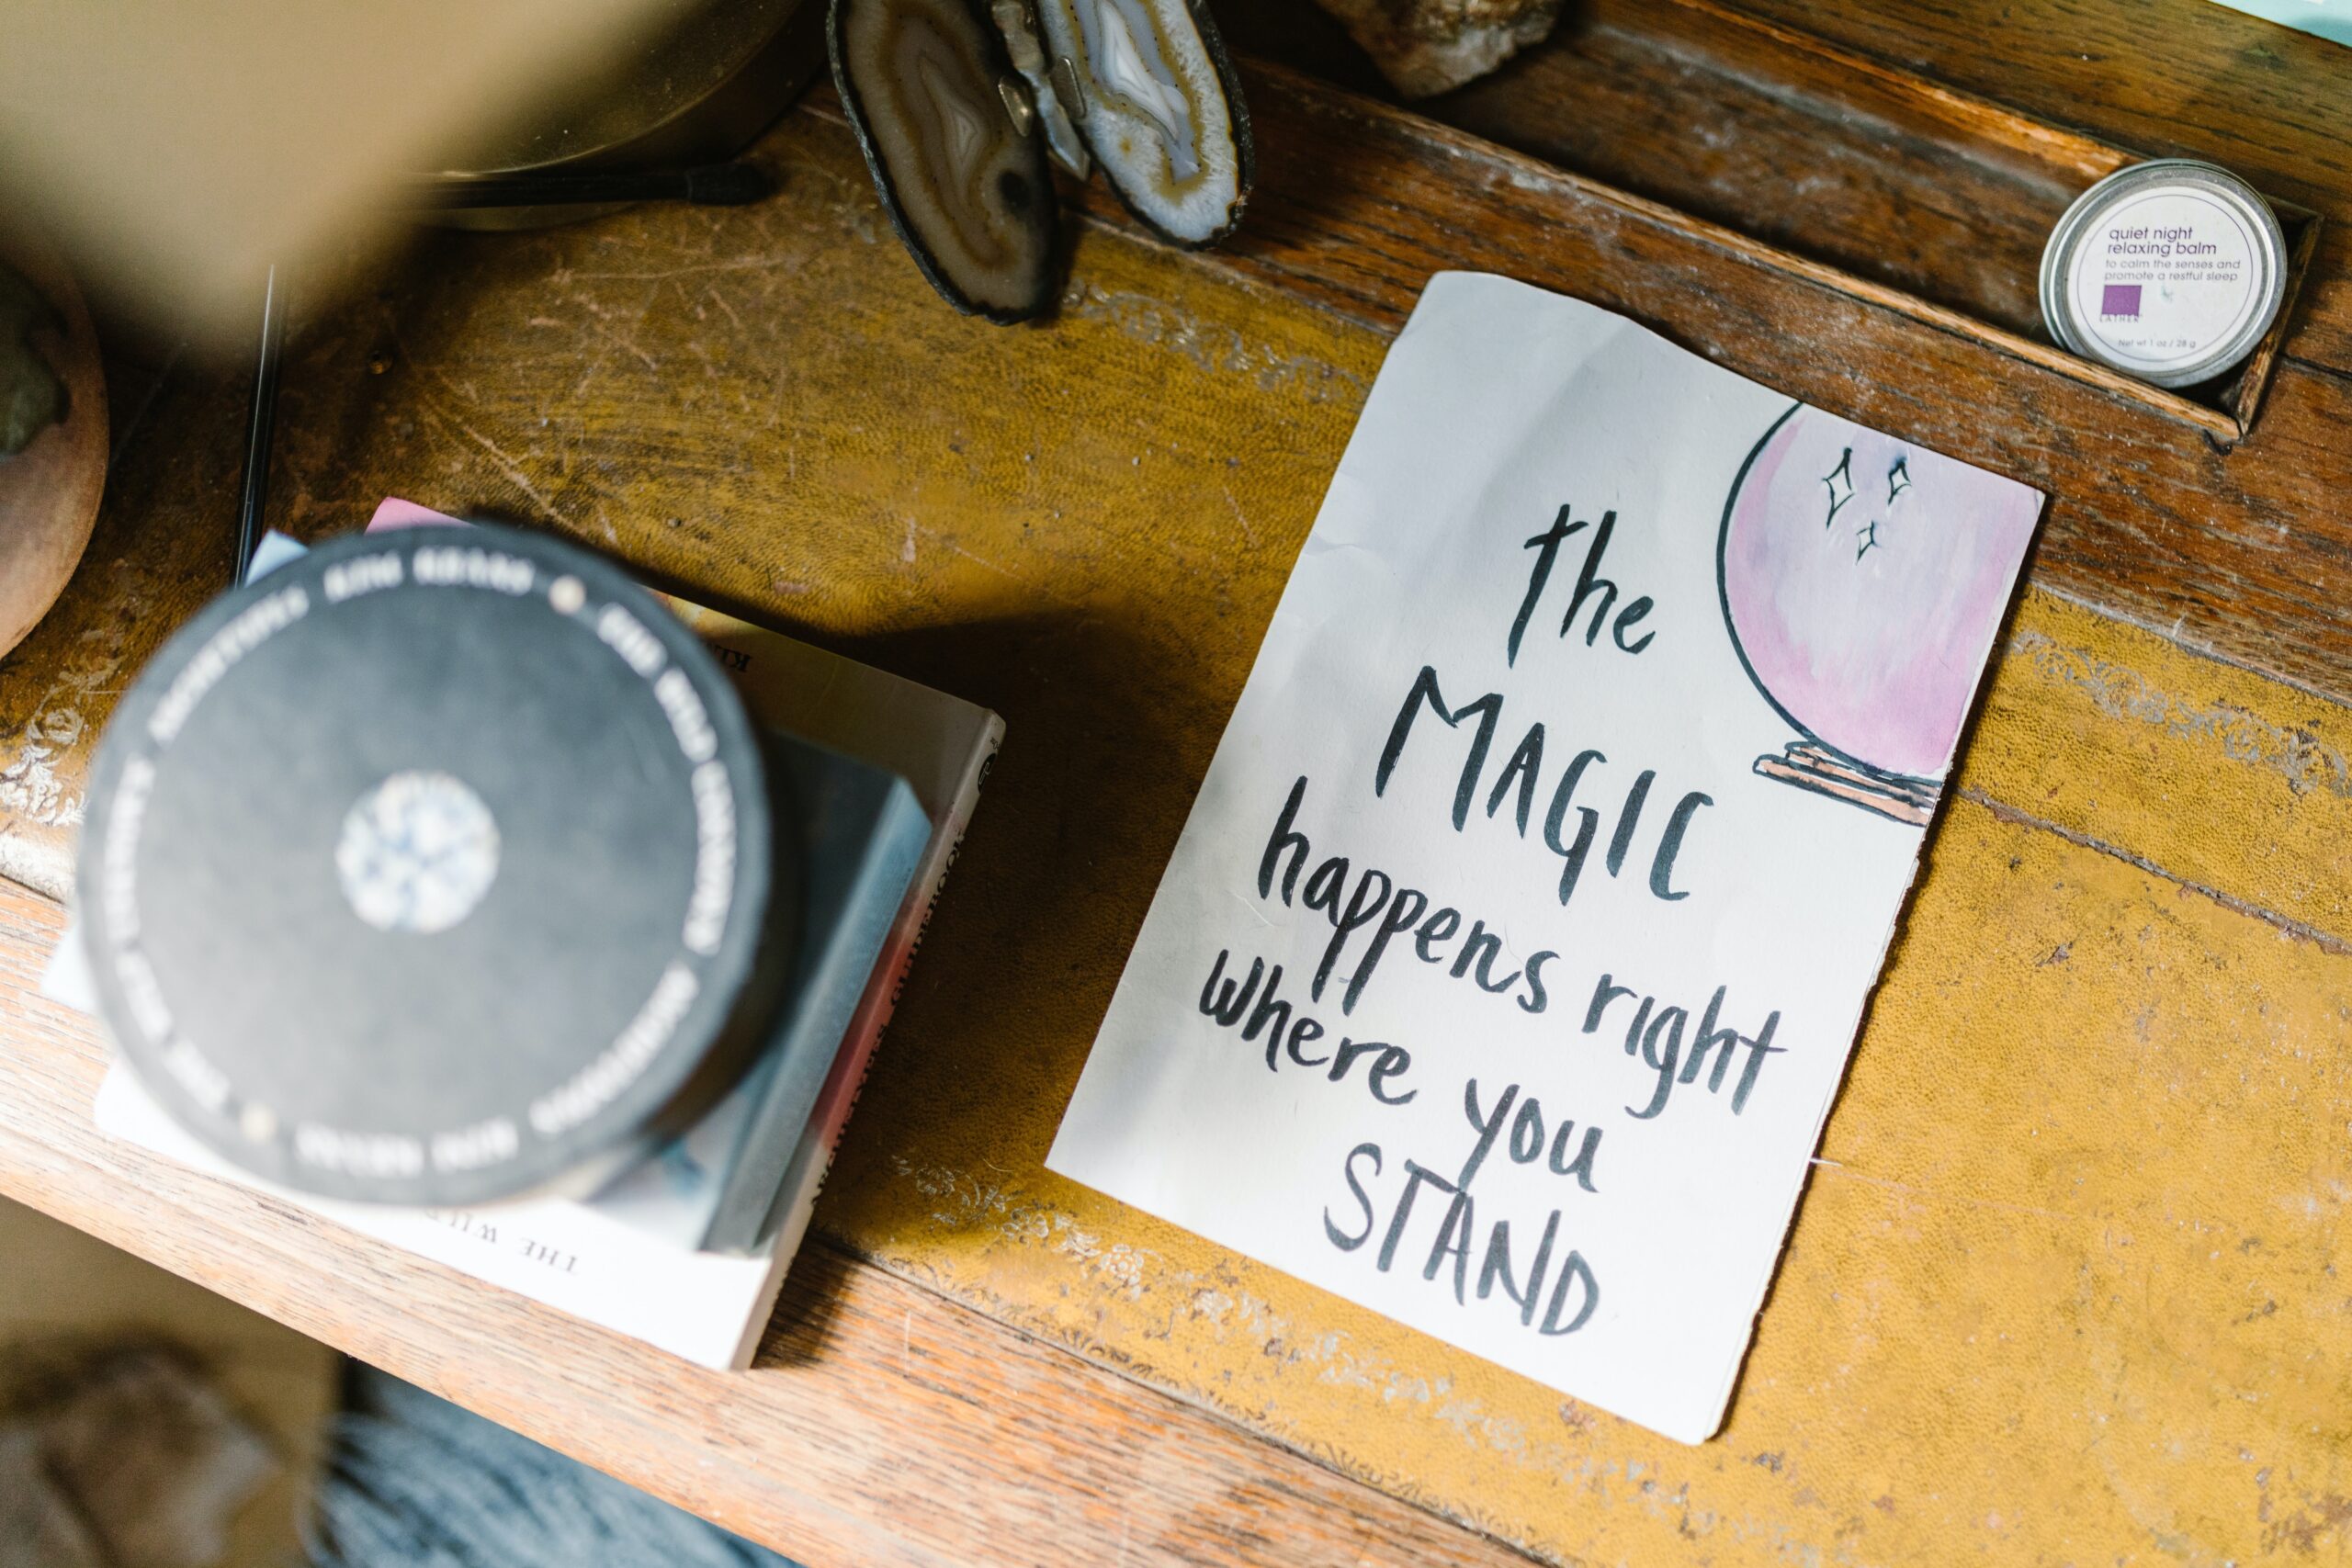 2022's energies - pad on a desk that says "the magic happens right where you stand"